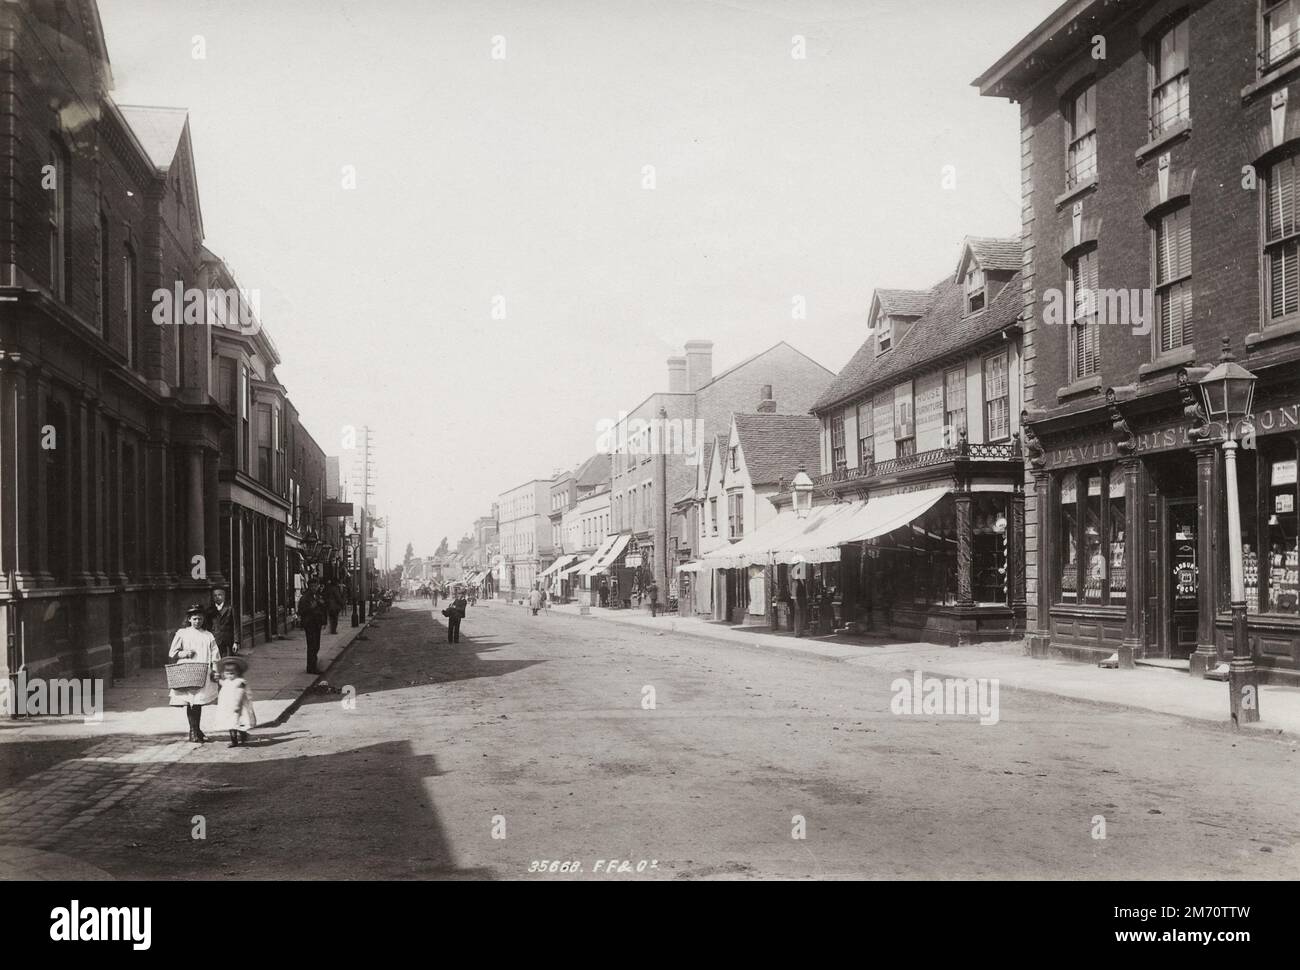 Vintage late 19th/early 20th century photograph: 1895 - High Street, Brentwood, Essex Stock Photo